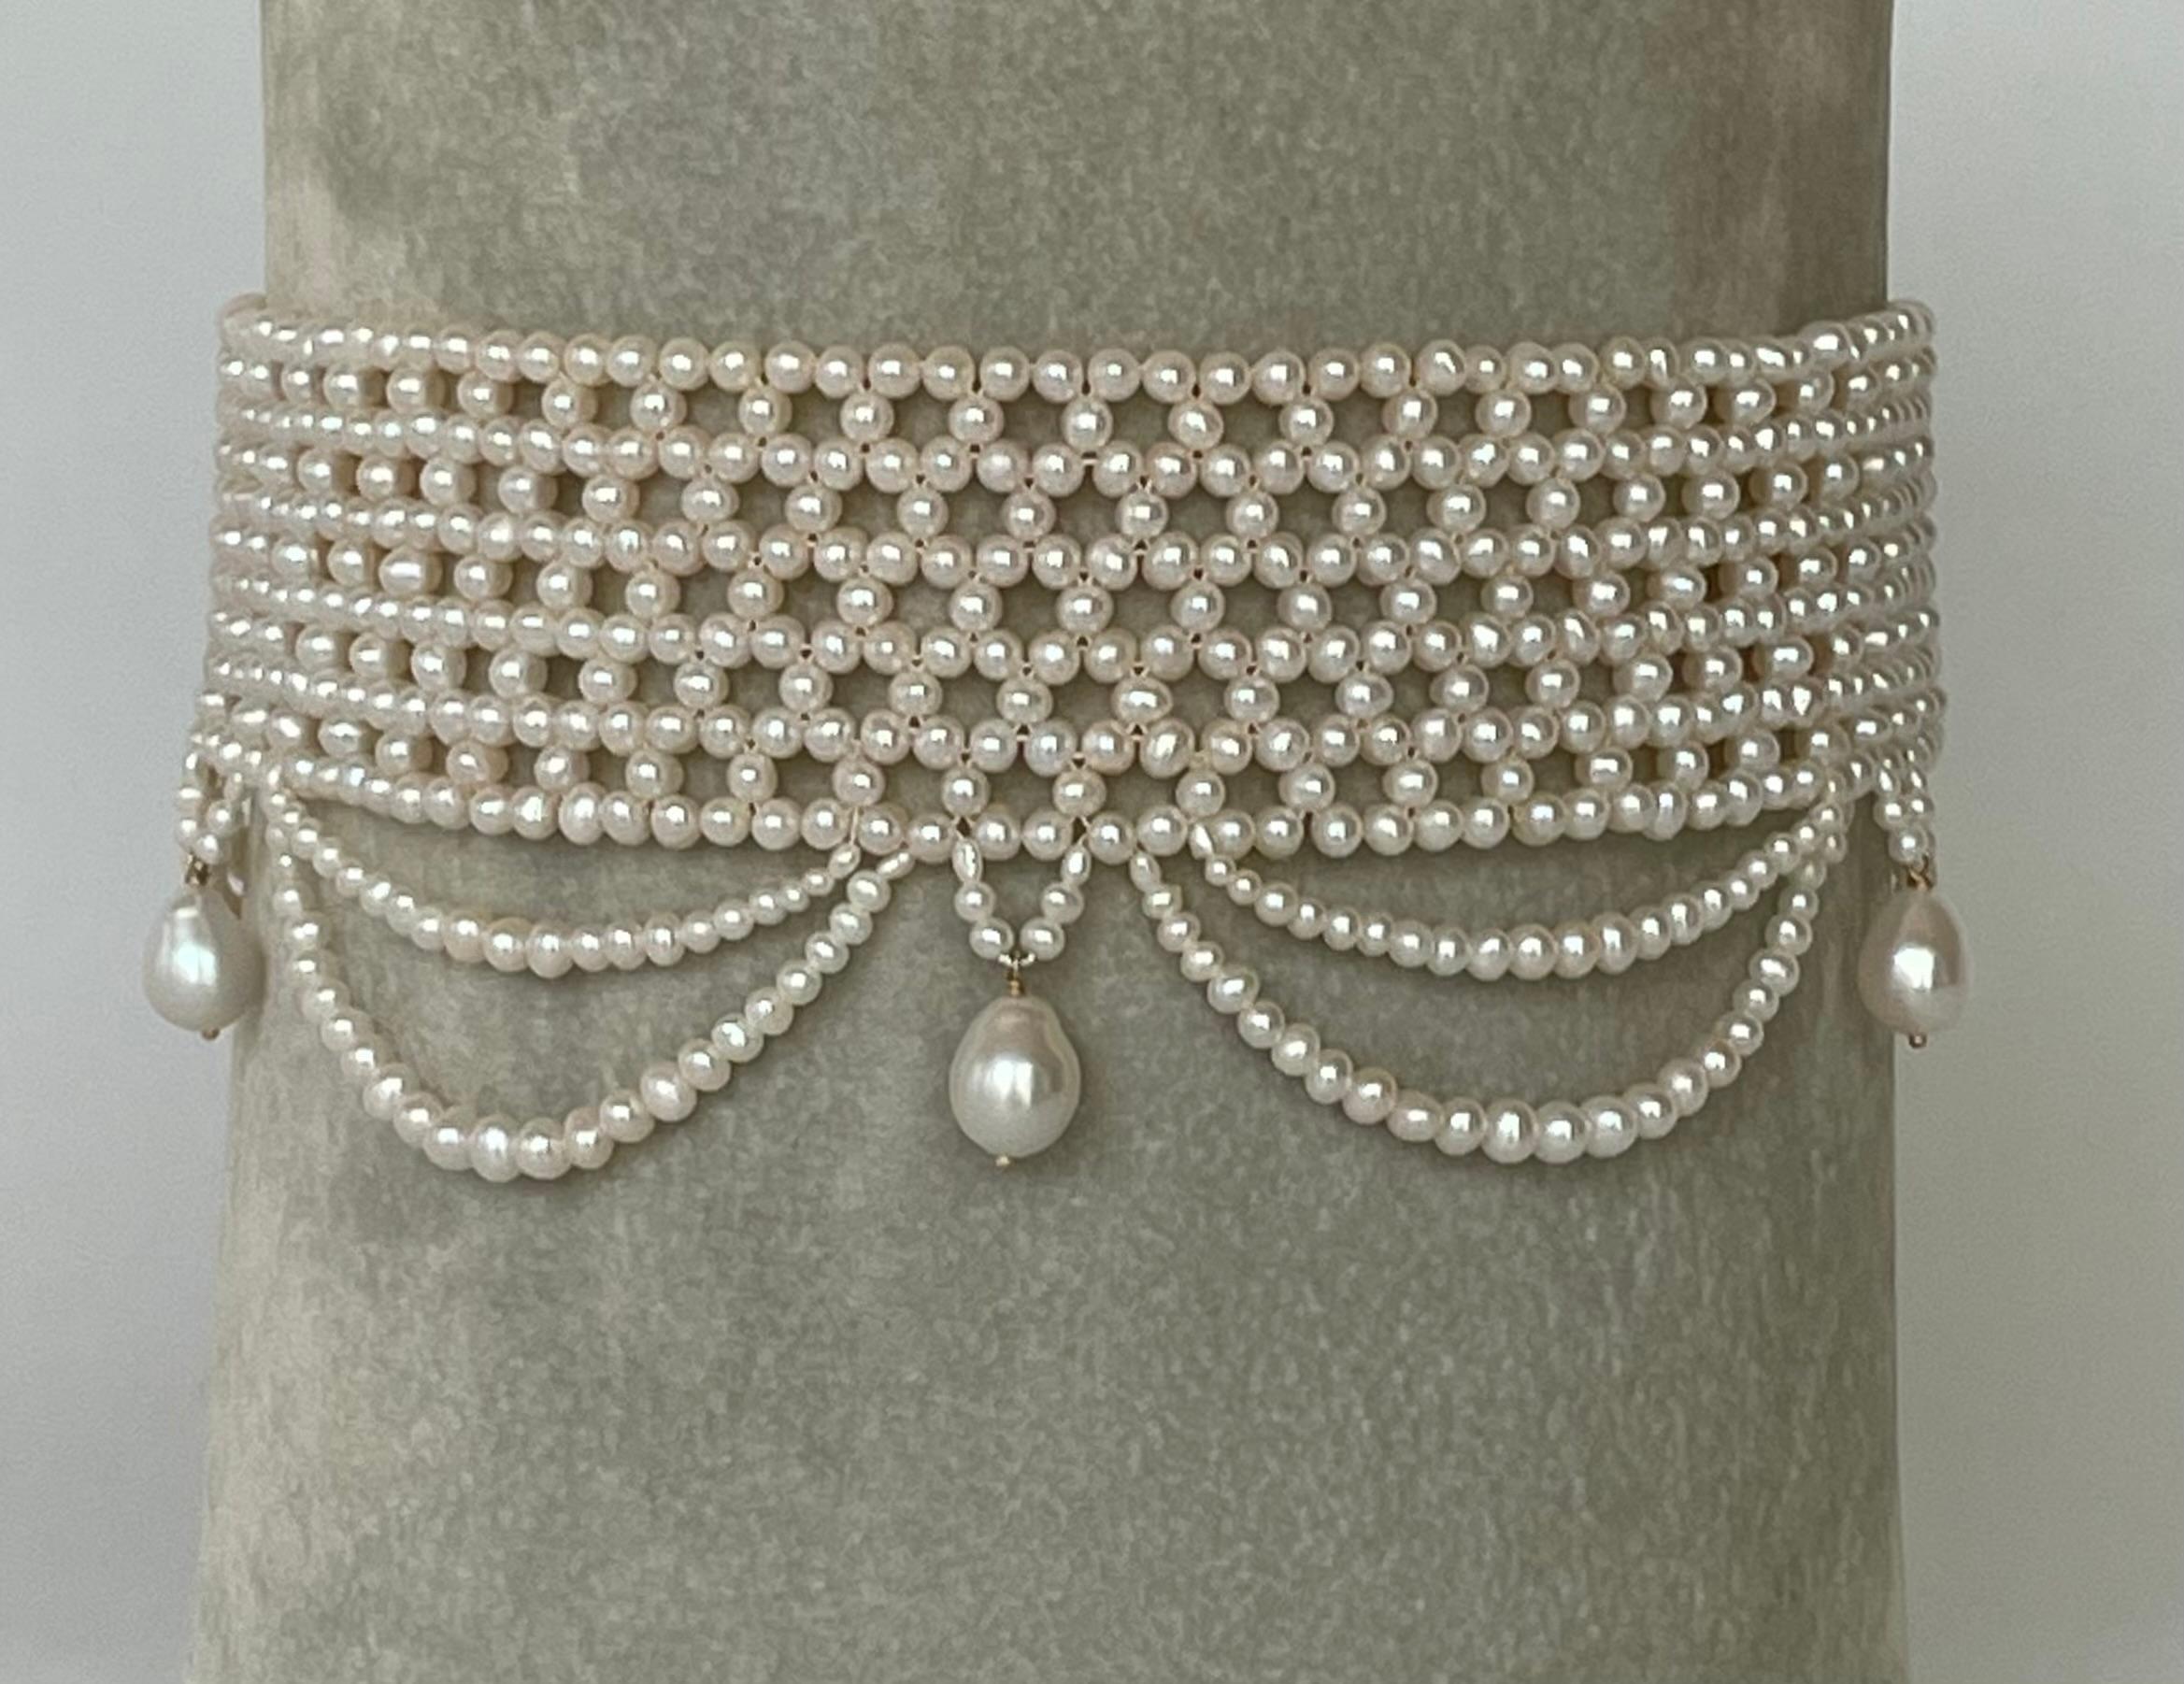 
-- This beautiful handwoven pearl choker has pearls from 2.5mm to 3mm. The necklace is intricately handwoven to create a “lacelike” design.  The Choker is tapered in design to fit along the curve of the neckline. The clasp is made of rhodium plated